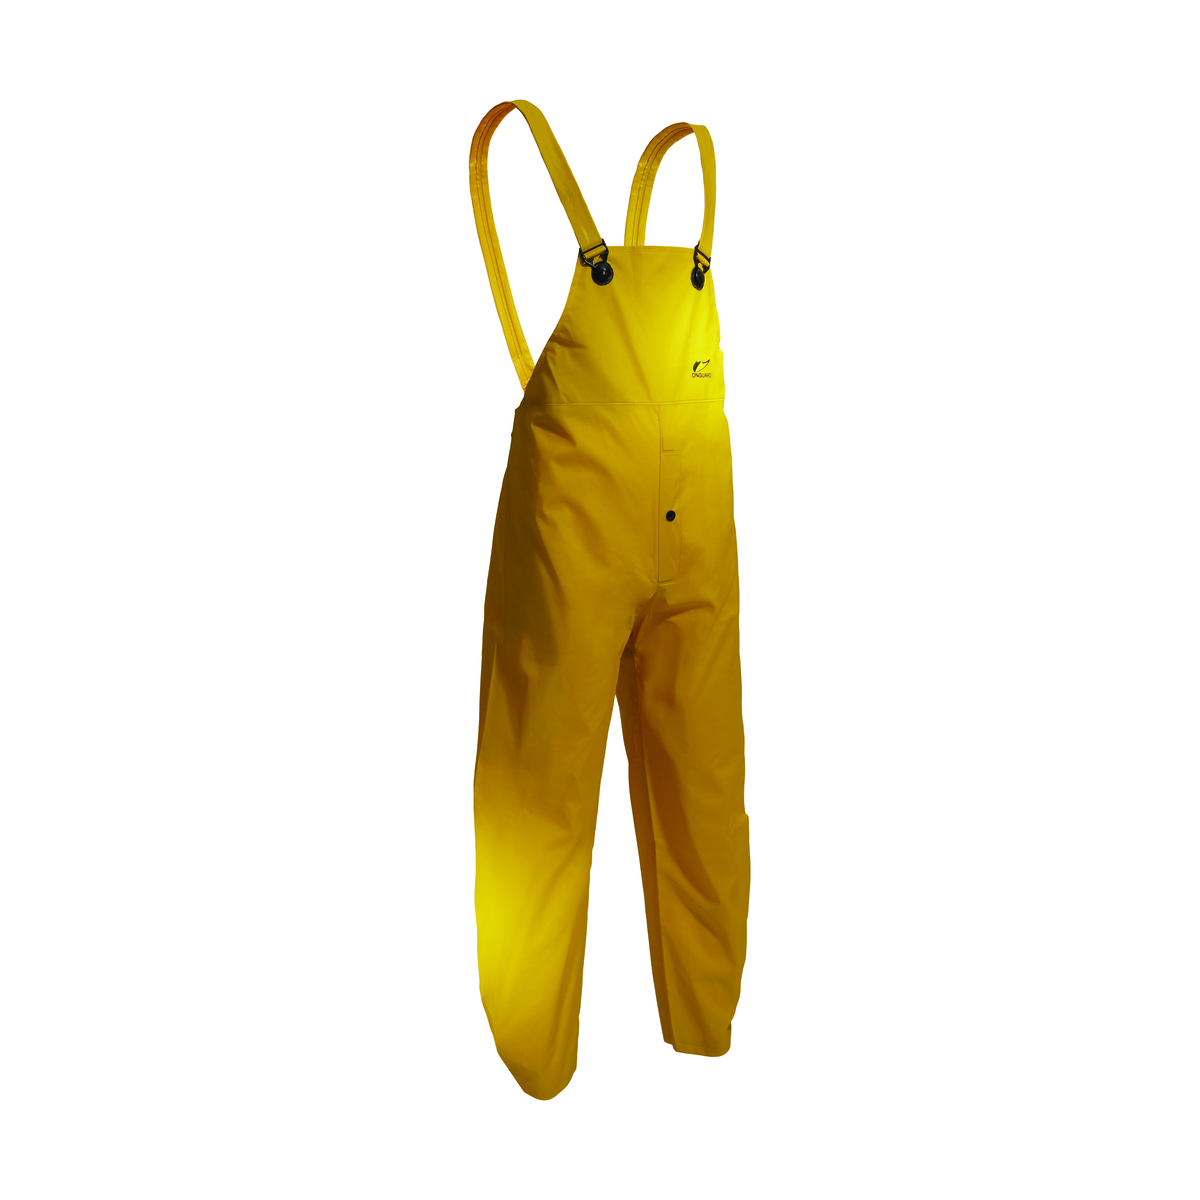 Dunlop® Protective Footwear Small Yellow Sitex Polyester/PVC Rain Coat With Detachable Hood